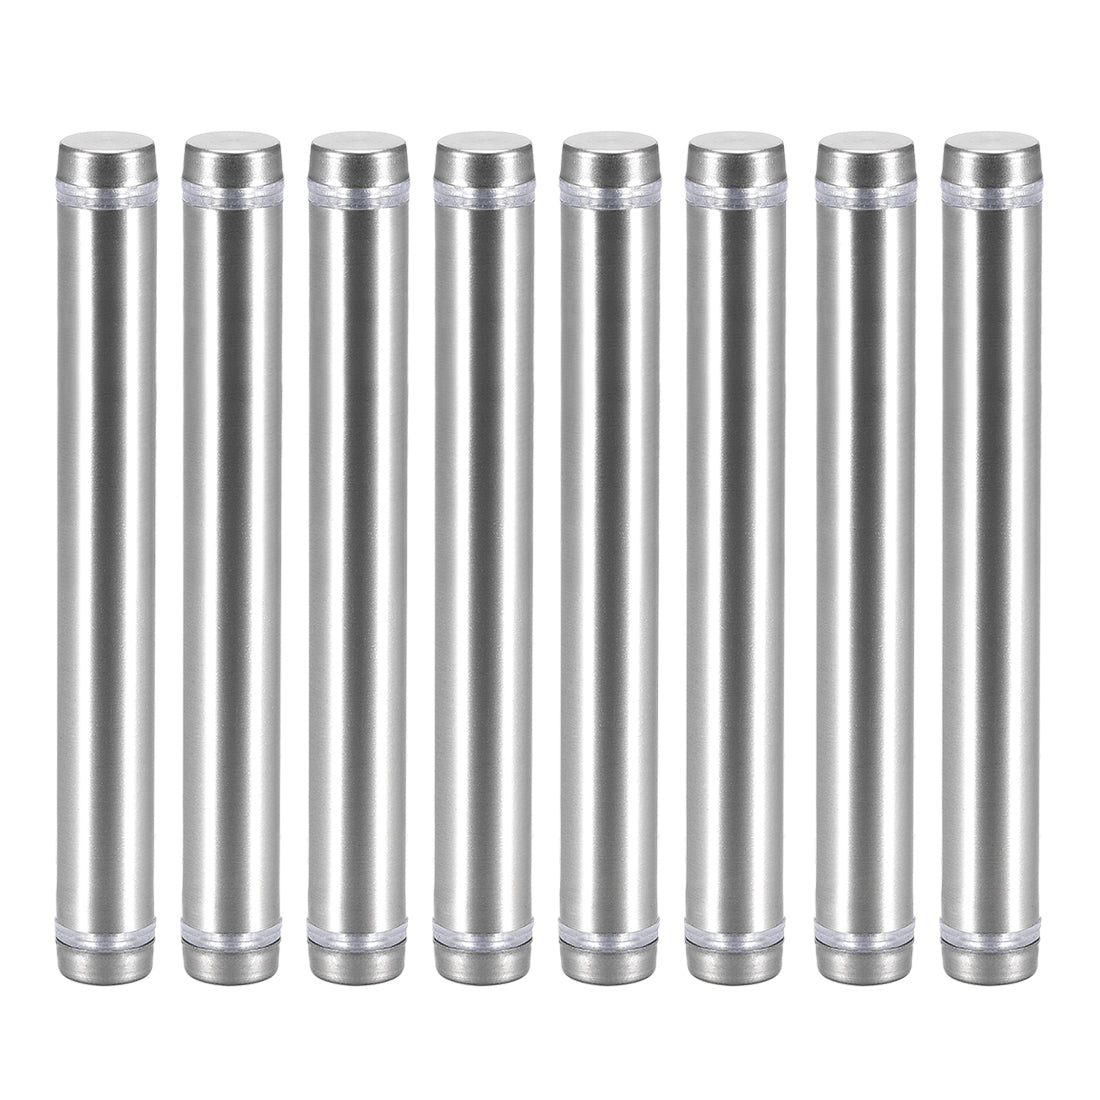 uxcell Uxcell Glass Standoff Double Head Stainless Steel Standoff Holder 12mm x 104mm 8 Pcs